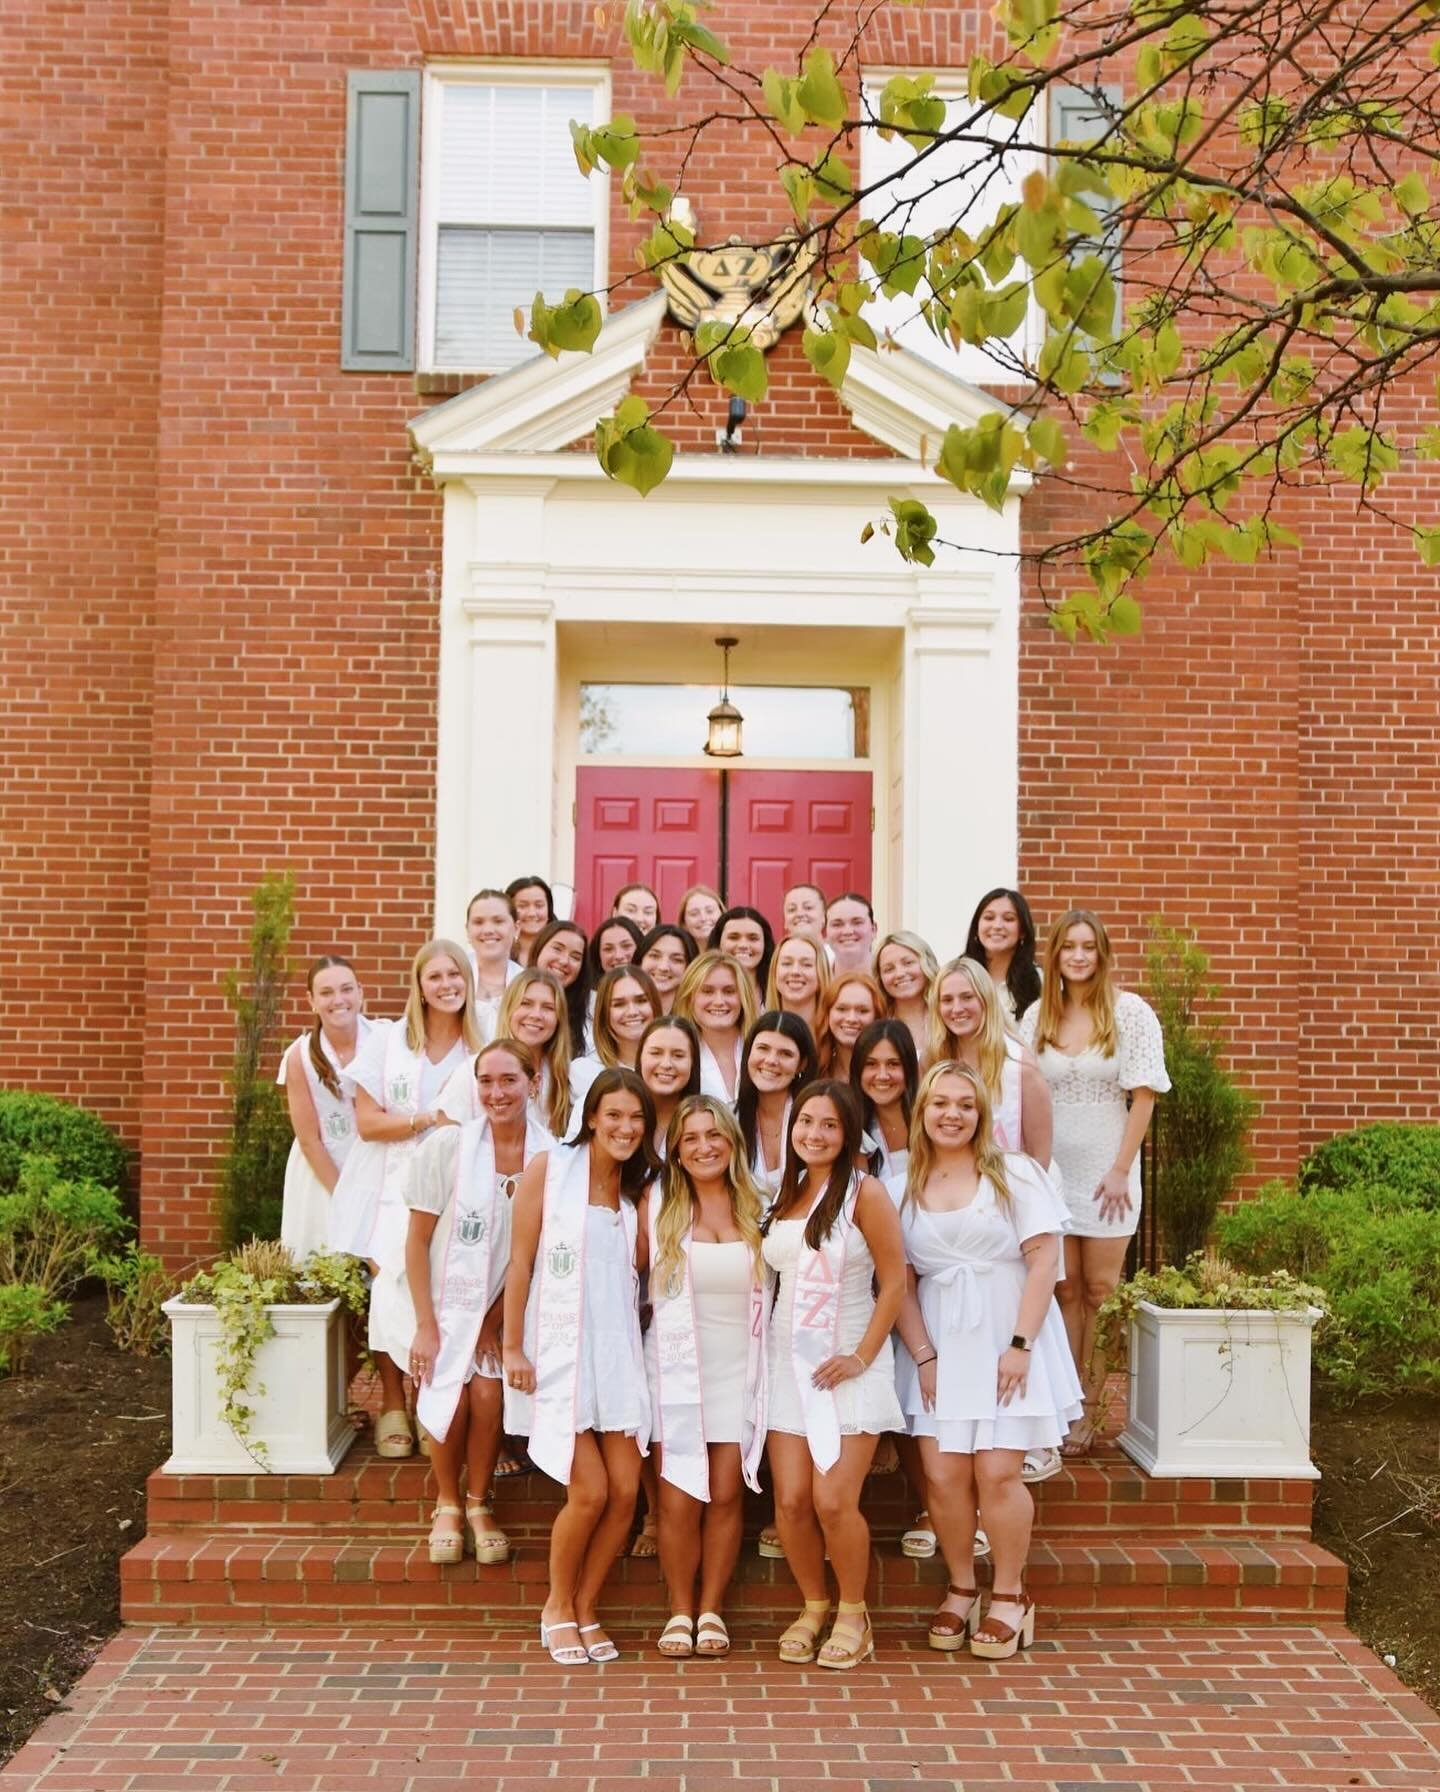 Our Spring 2024 Graduates &lt;3

Congratulations to 31 of our sisters for graduating this weekend. You will always have a home in Delta Zeta, Alpha Theta. We love you, and are so proud of all of your accomplishments! See you real soon &lt;3